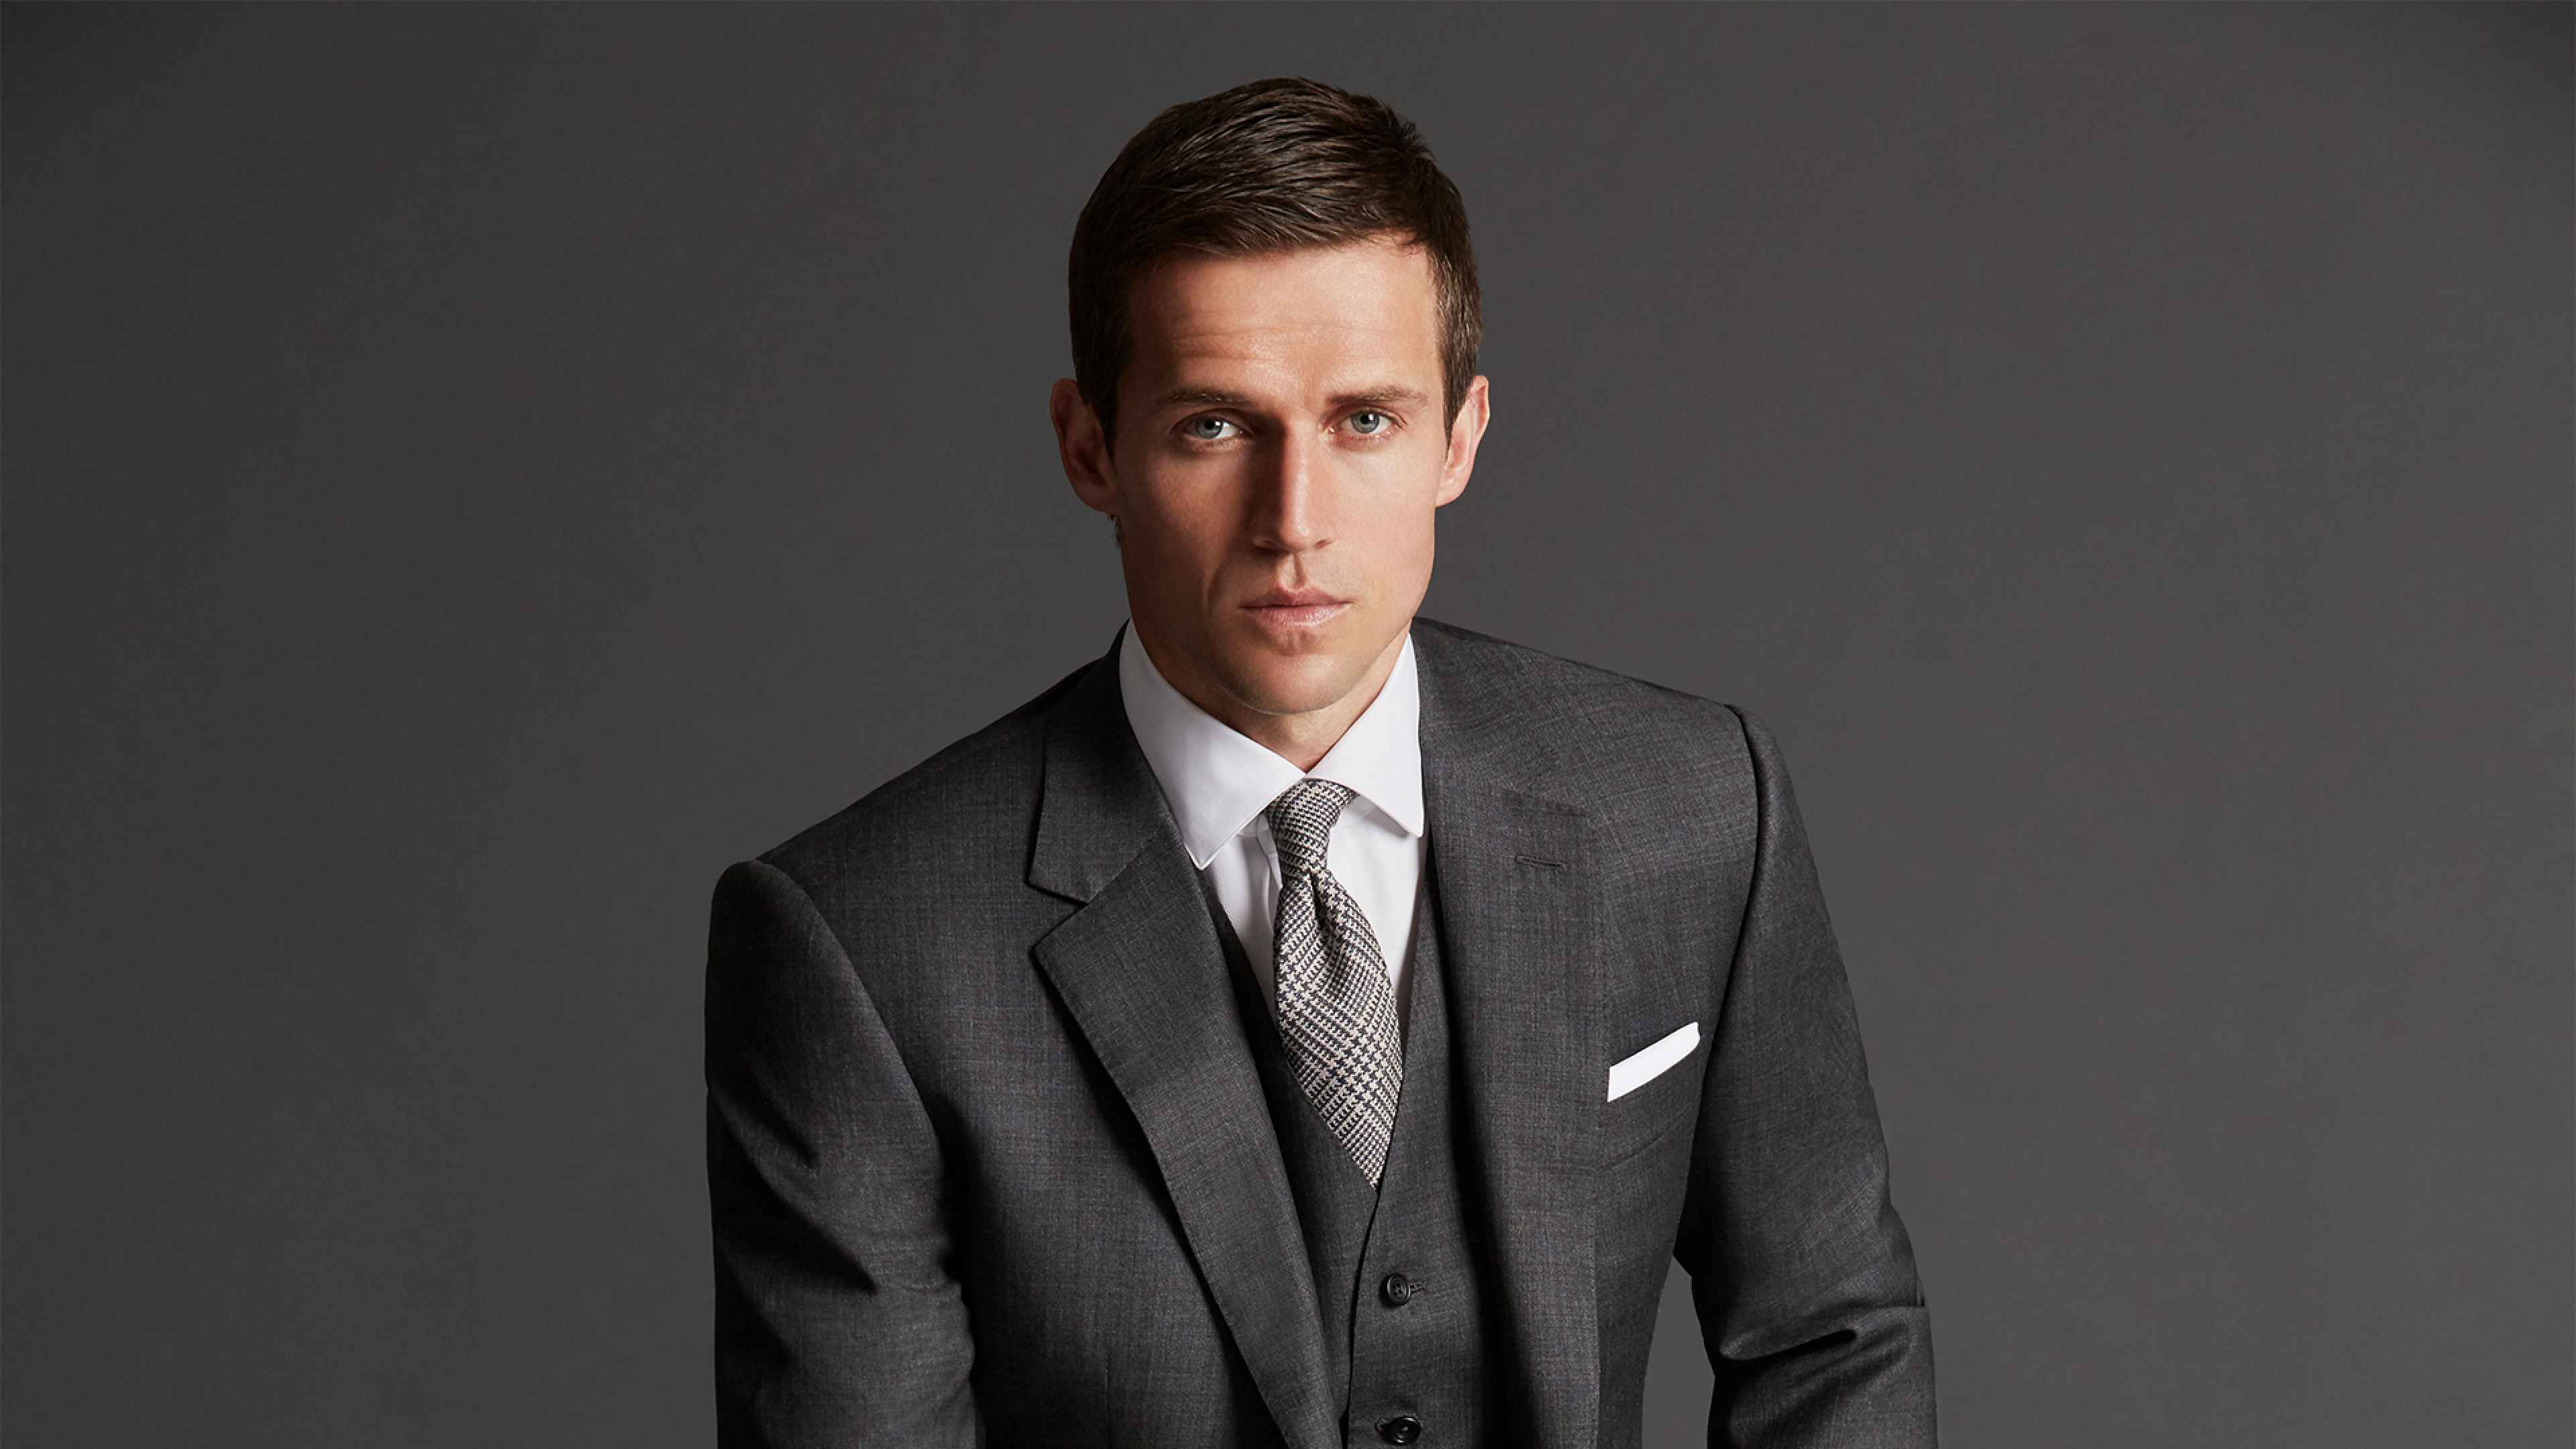 Suit up with Hackett’s Personal Tailoring | Square Mile